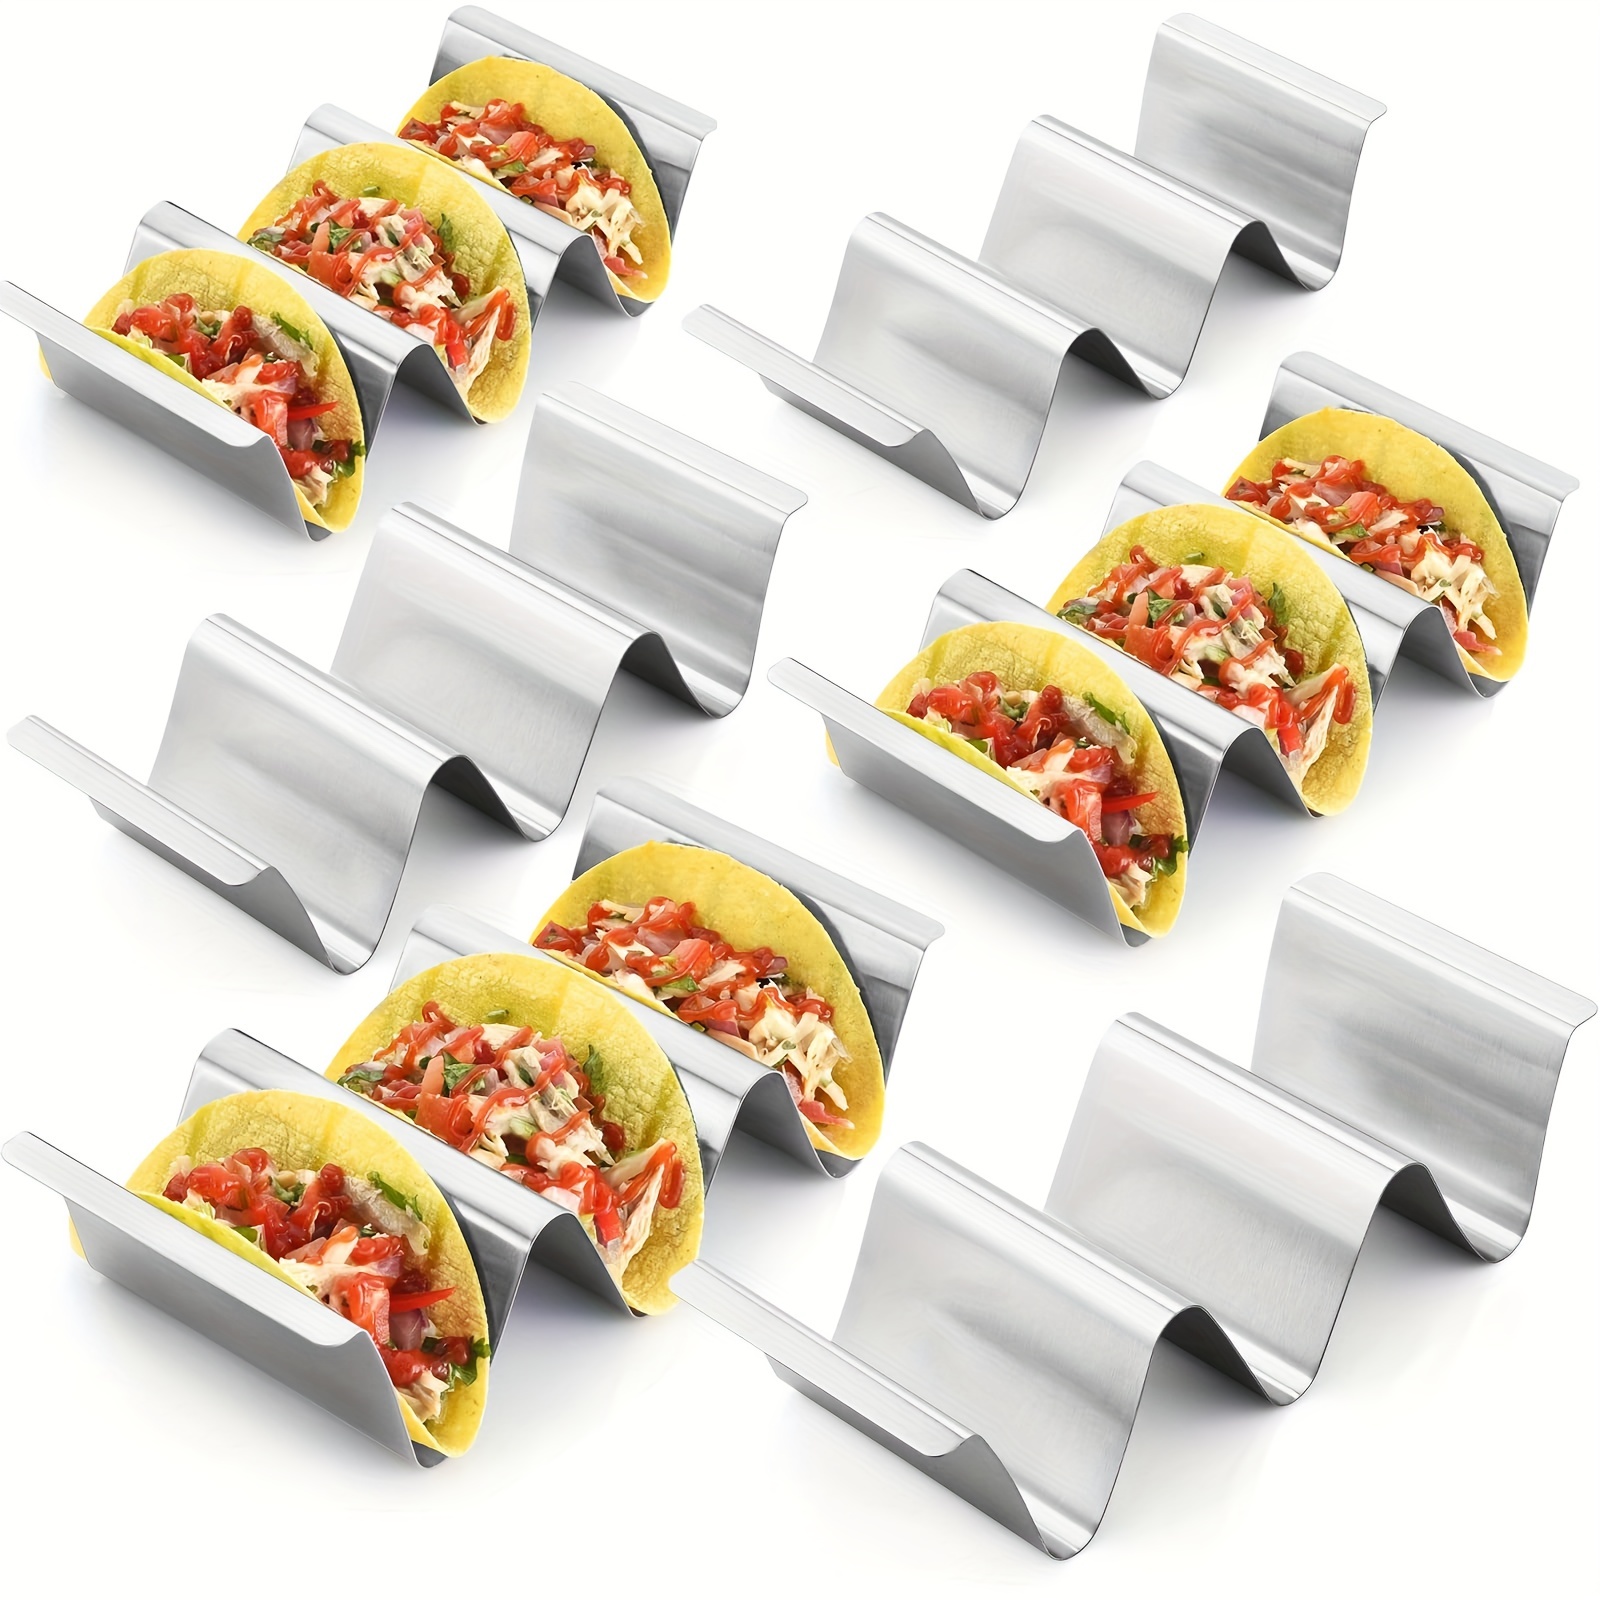 

1pc Taco Holder Stand, Stainless Steel Taco Tray, Stylish Taco Shell Holders, Rack Holds Up To 3 Tacos Each Keeping Shells Upright, Health Material Taco Rack, Grill And Dishwasher Safe